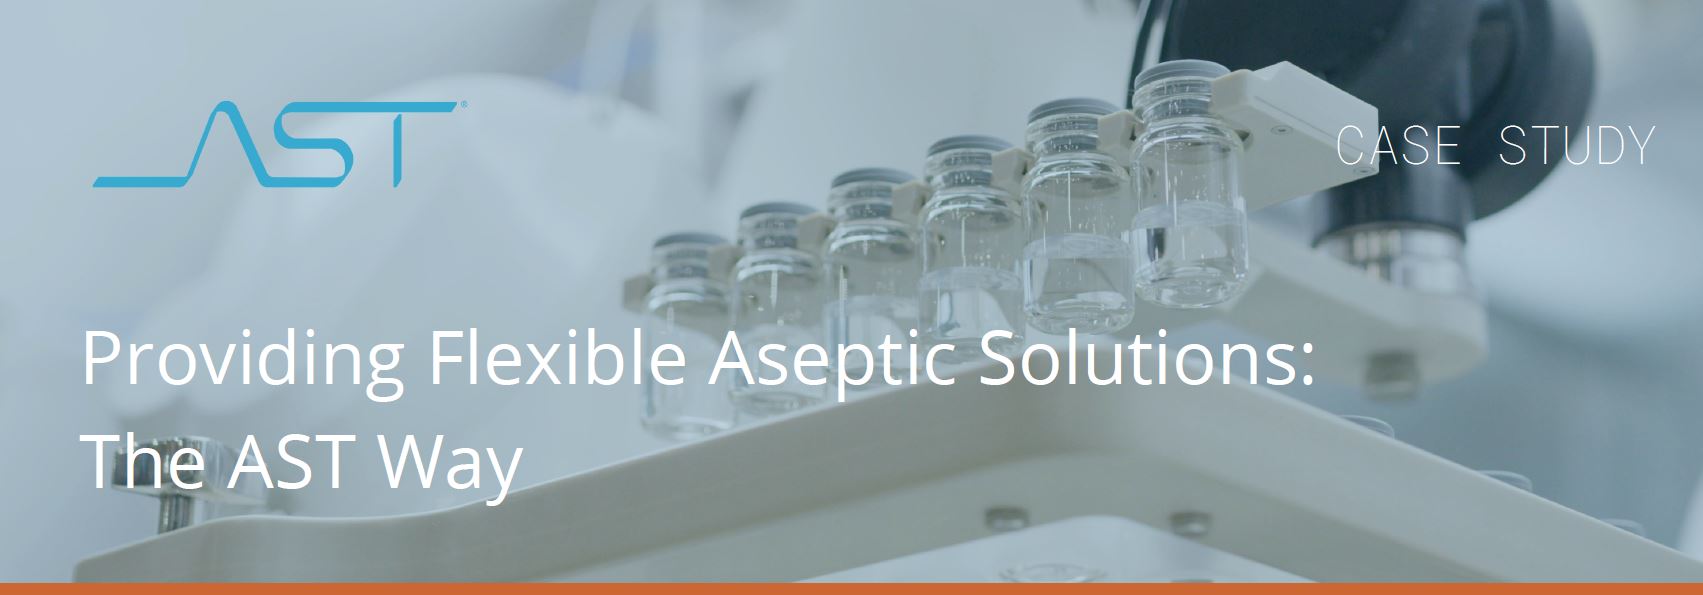 Providing Flexible Aseptic Solutions: The AST Way